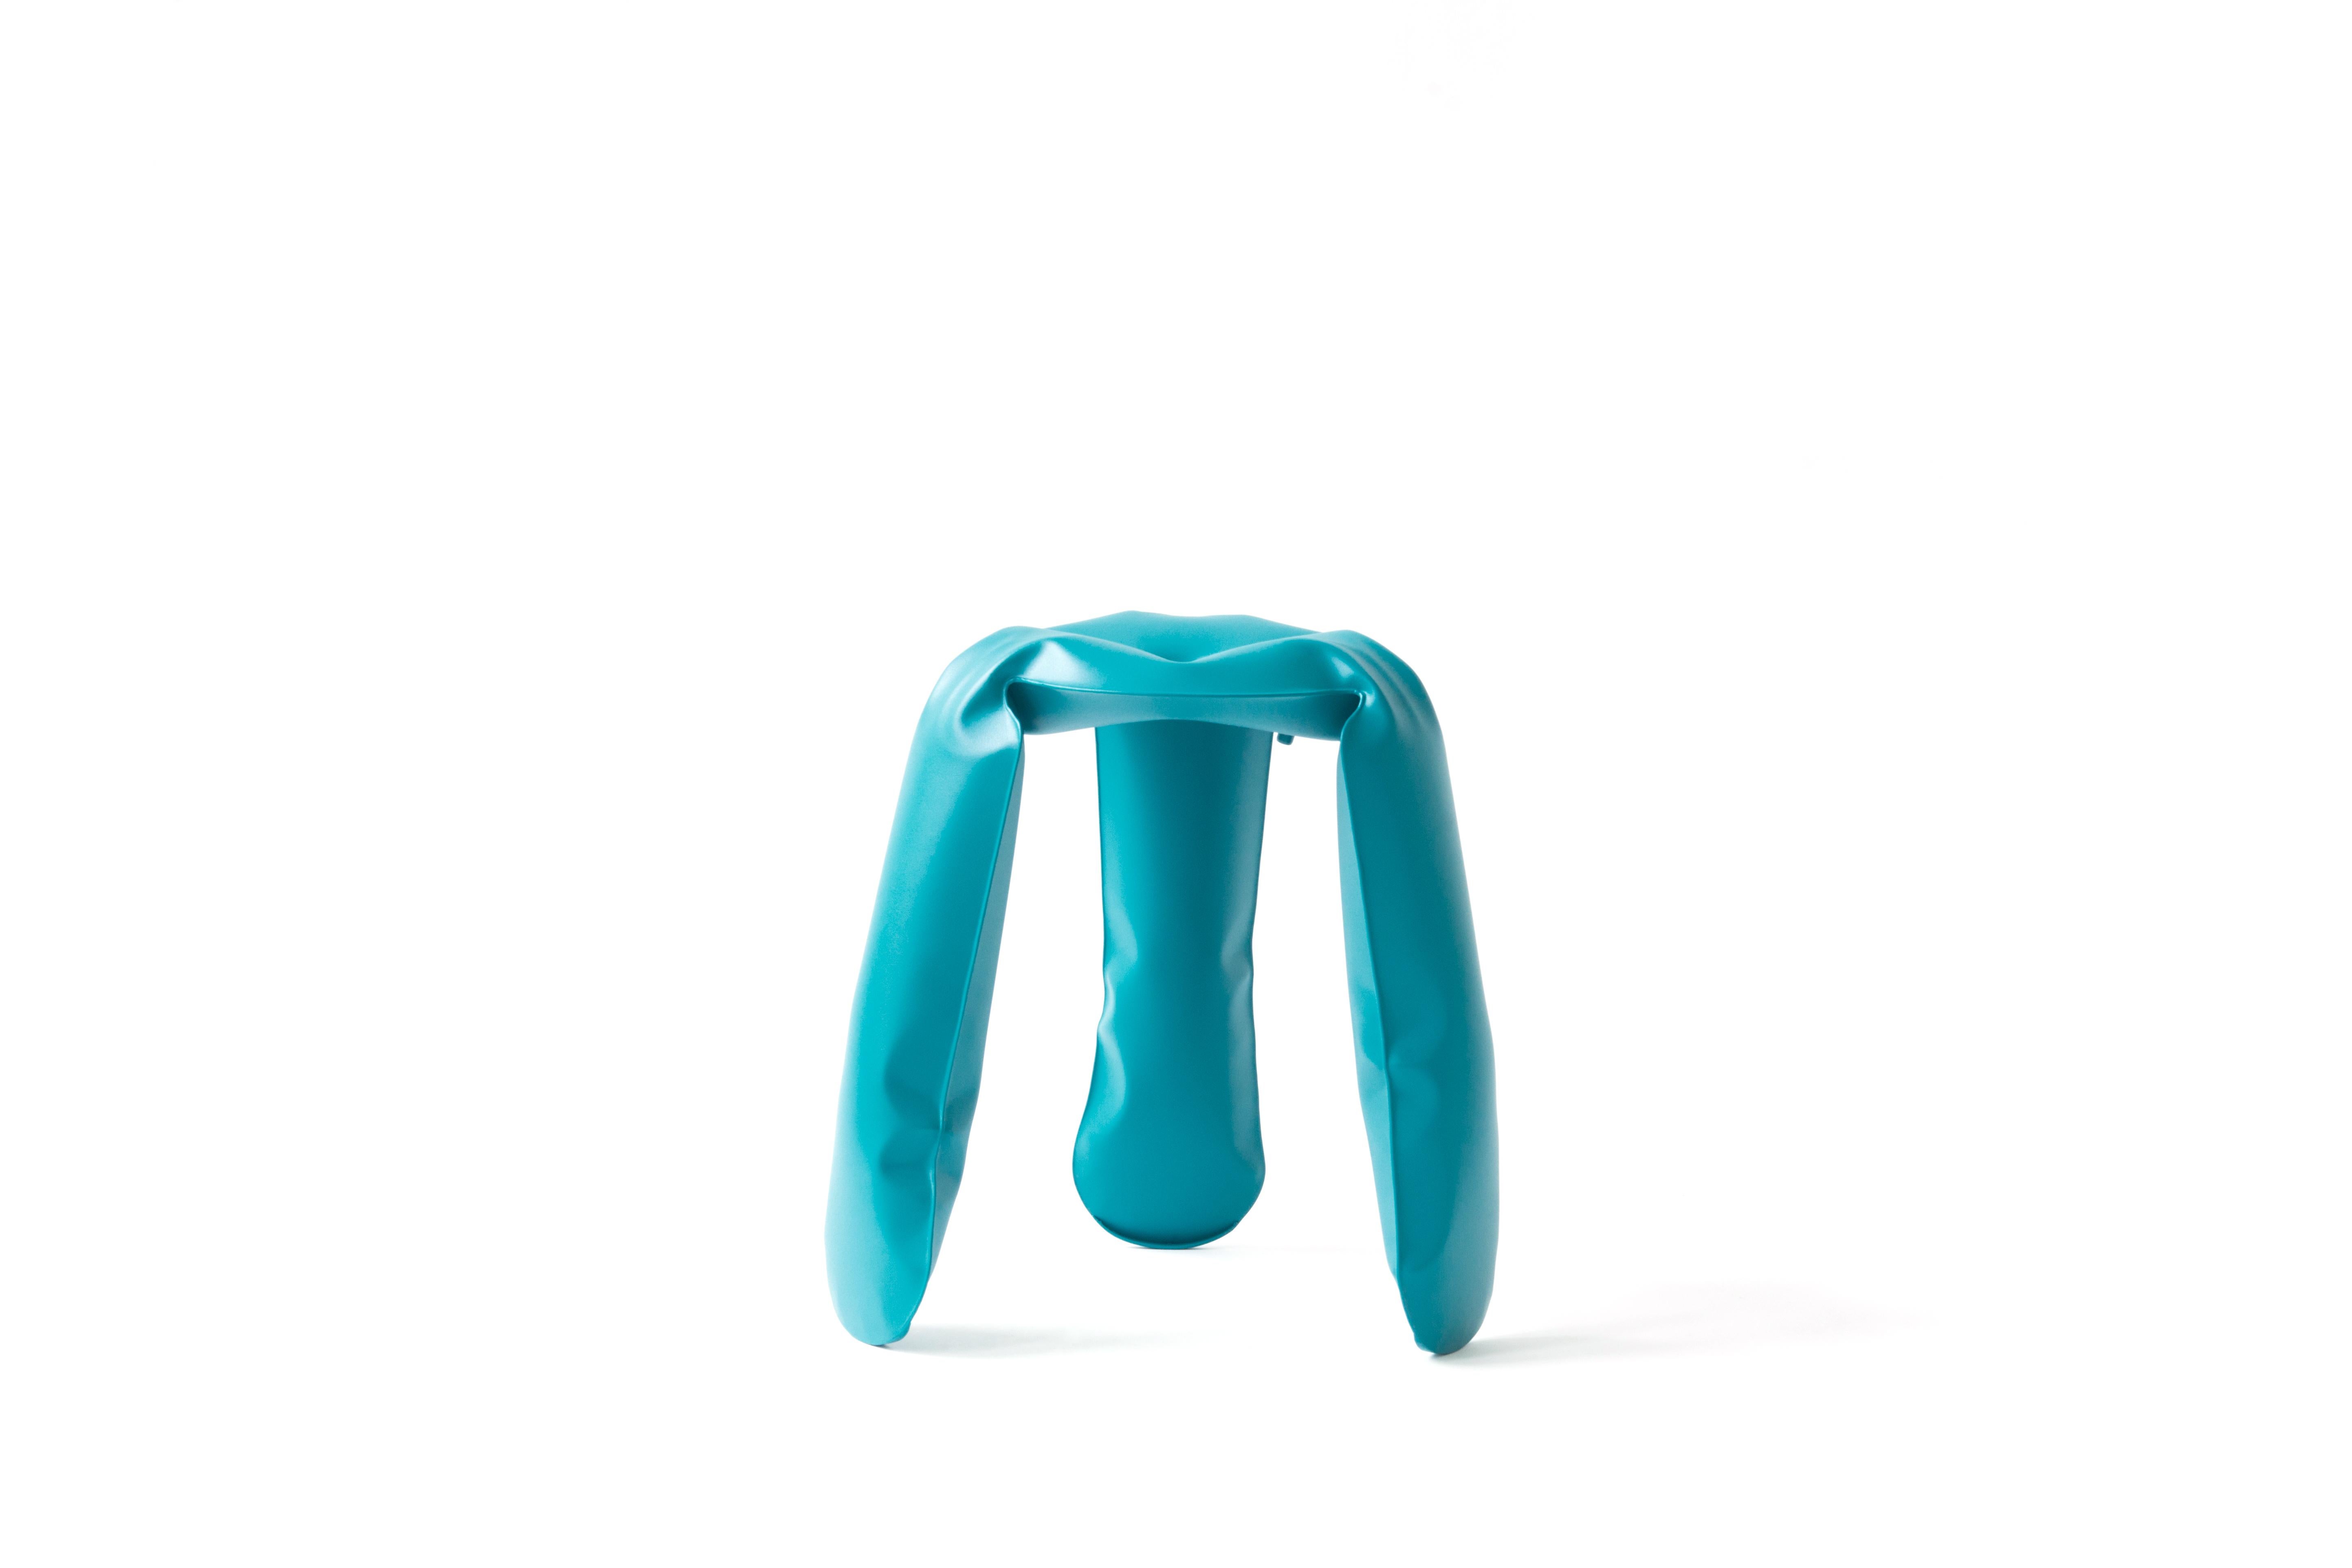 Water blue mini plopp stool by Zieta.
Dimensions: D 25 x H 38 cm 
Material: Carbon steel. 
Finish: Powder-coated. Matt finish.
Available in colors: strawberry red, water blue, yellow glossy, flamed gold, and deep space blue. Available in stainless